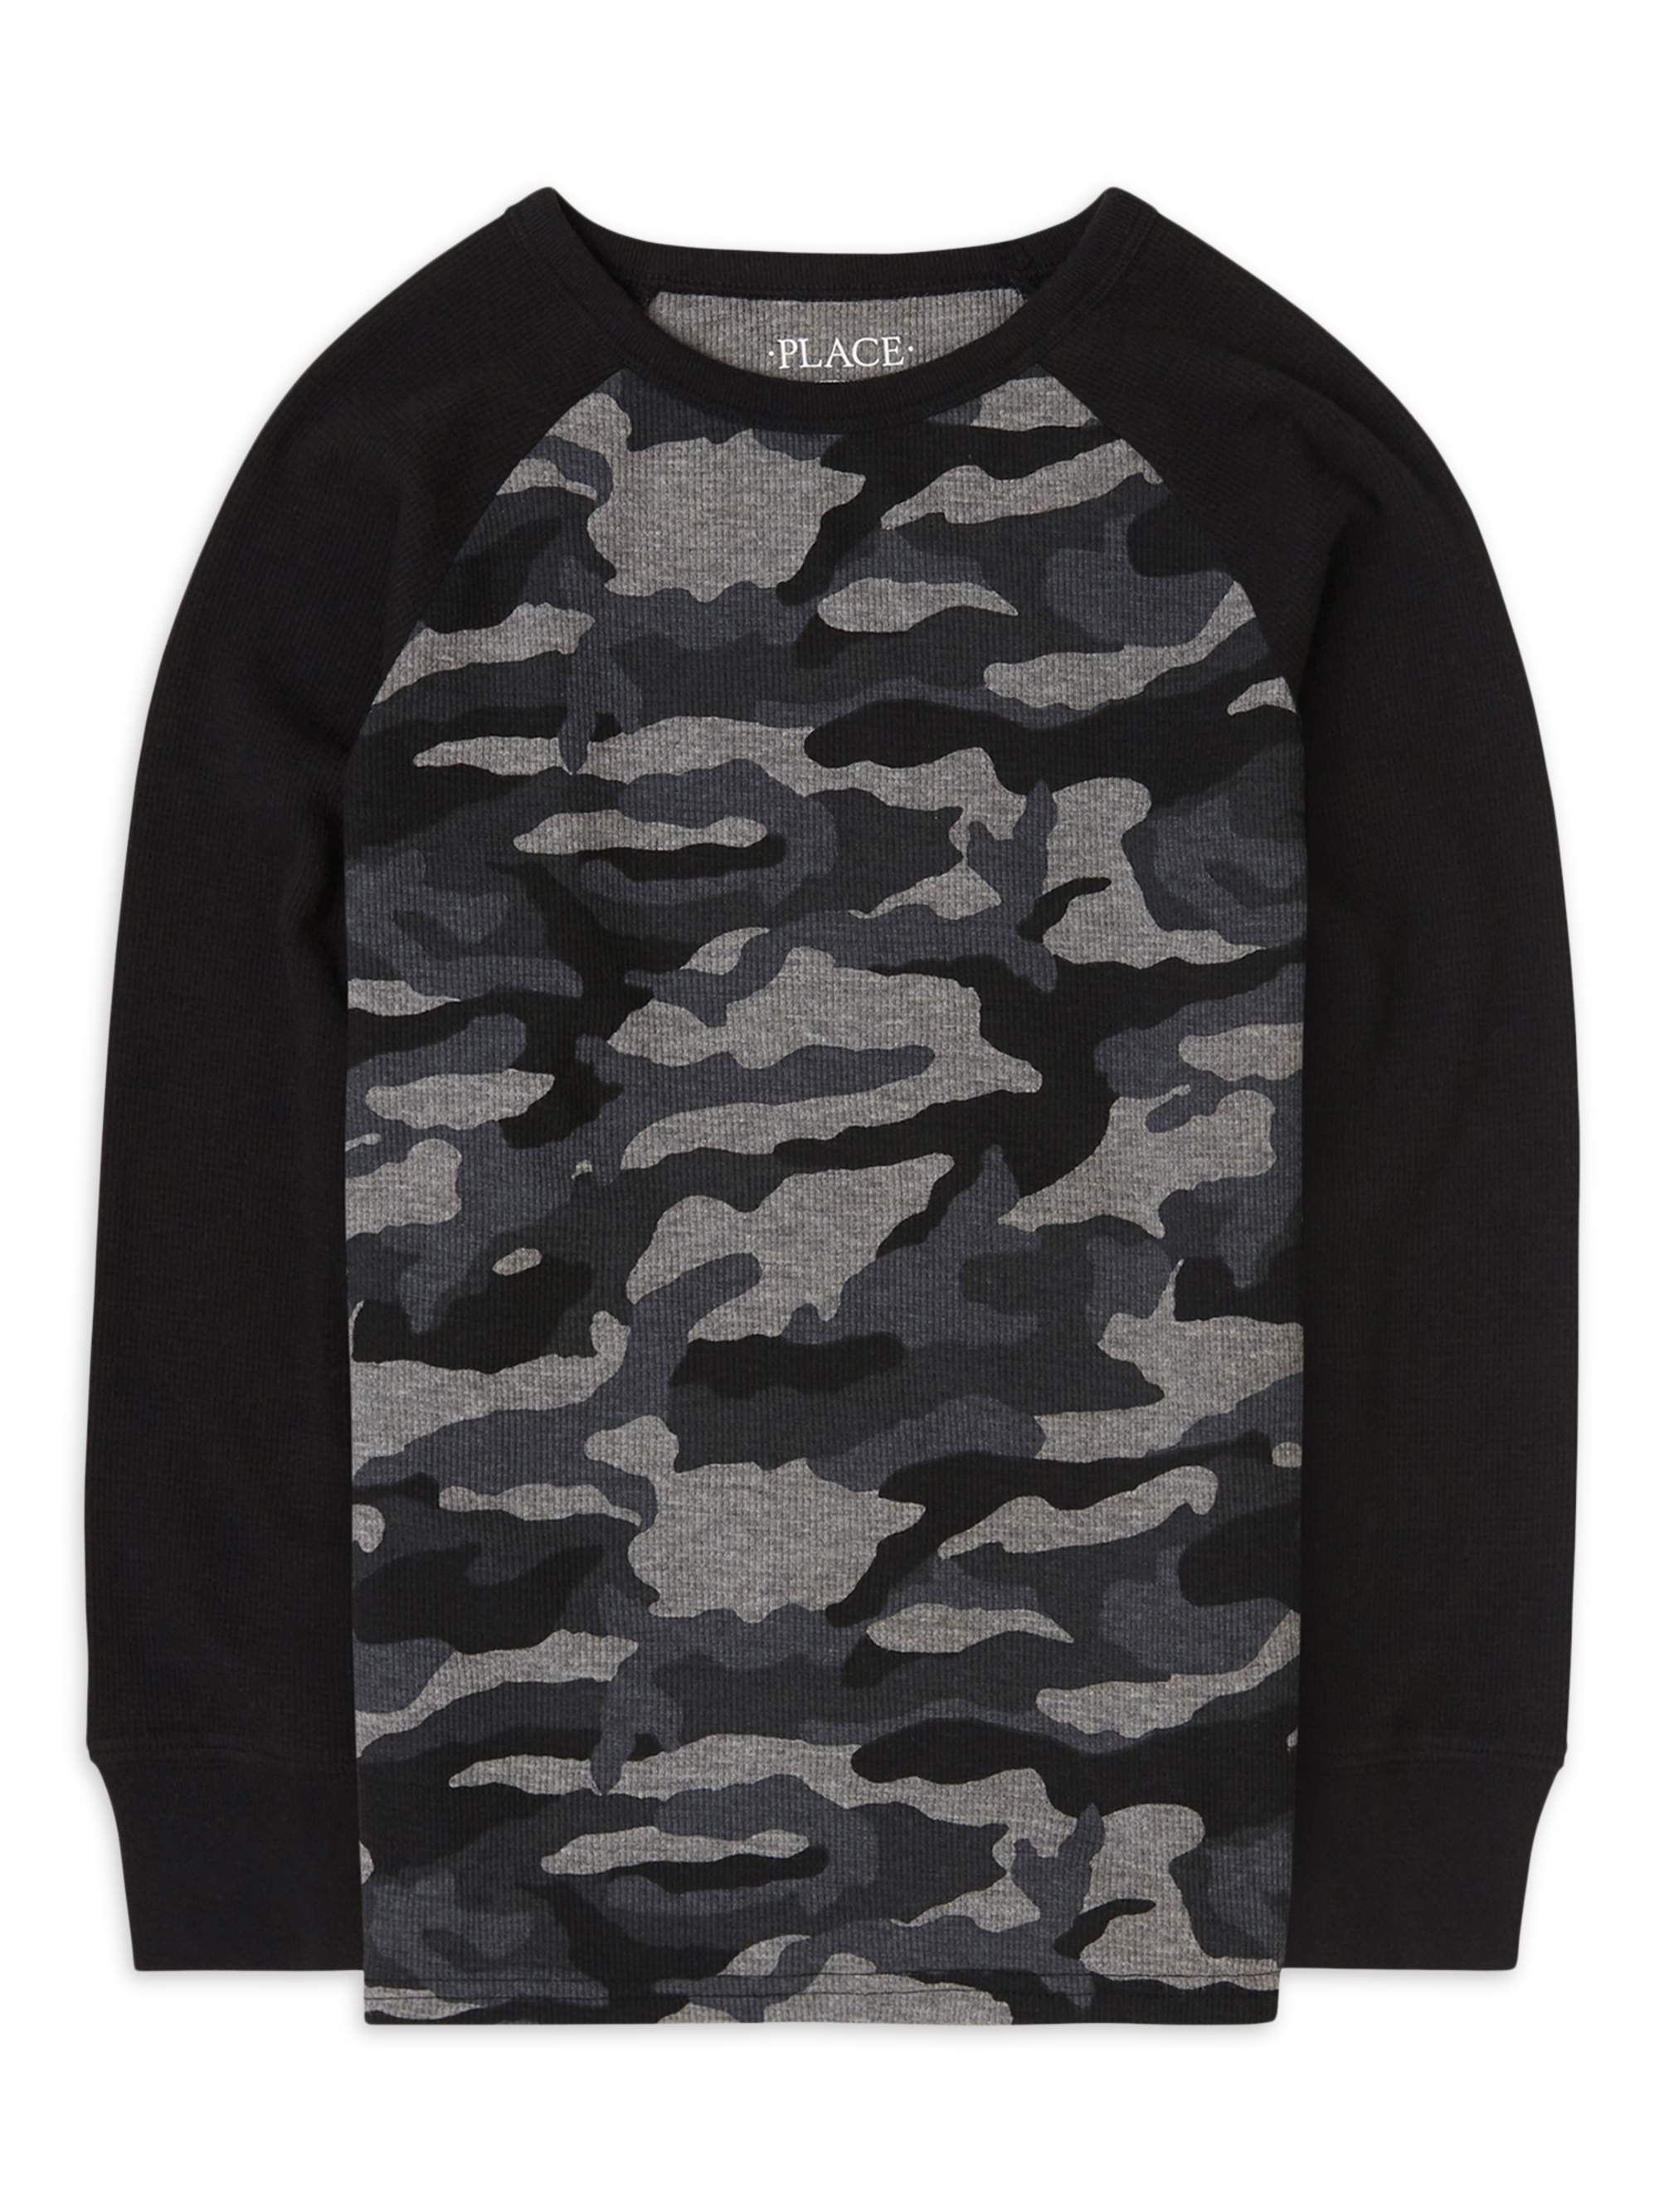 Boys Long Sleeve Camo Thermal Top  The Children's Place - GRAY STEEL